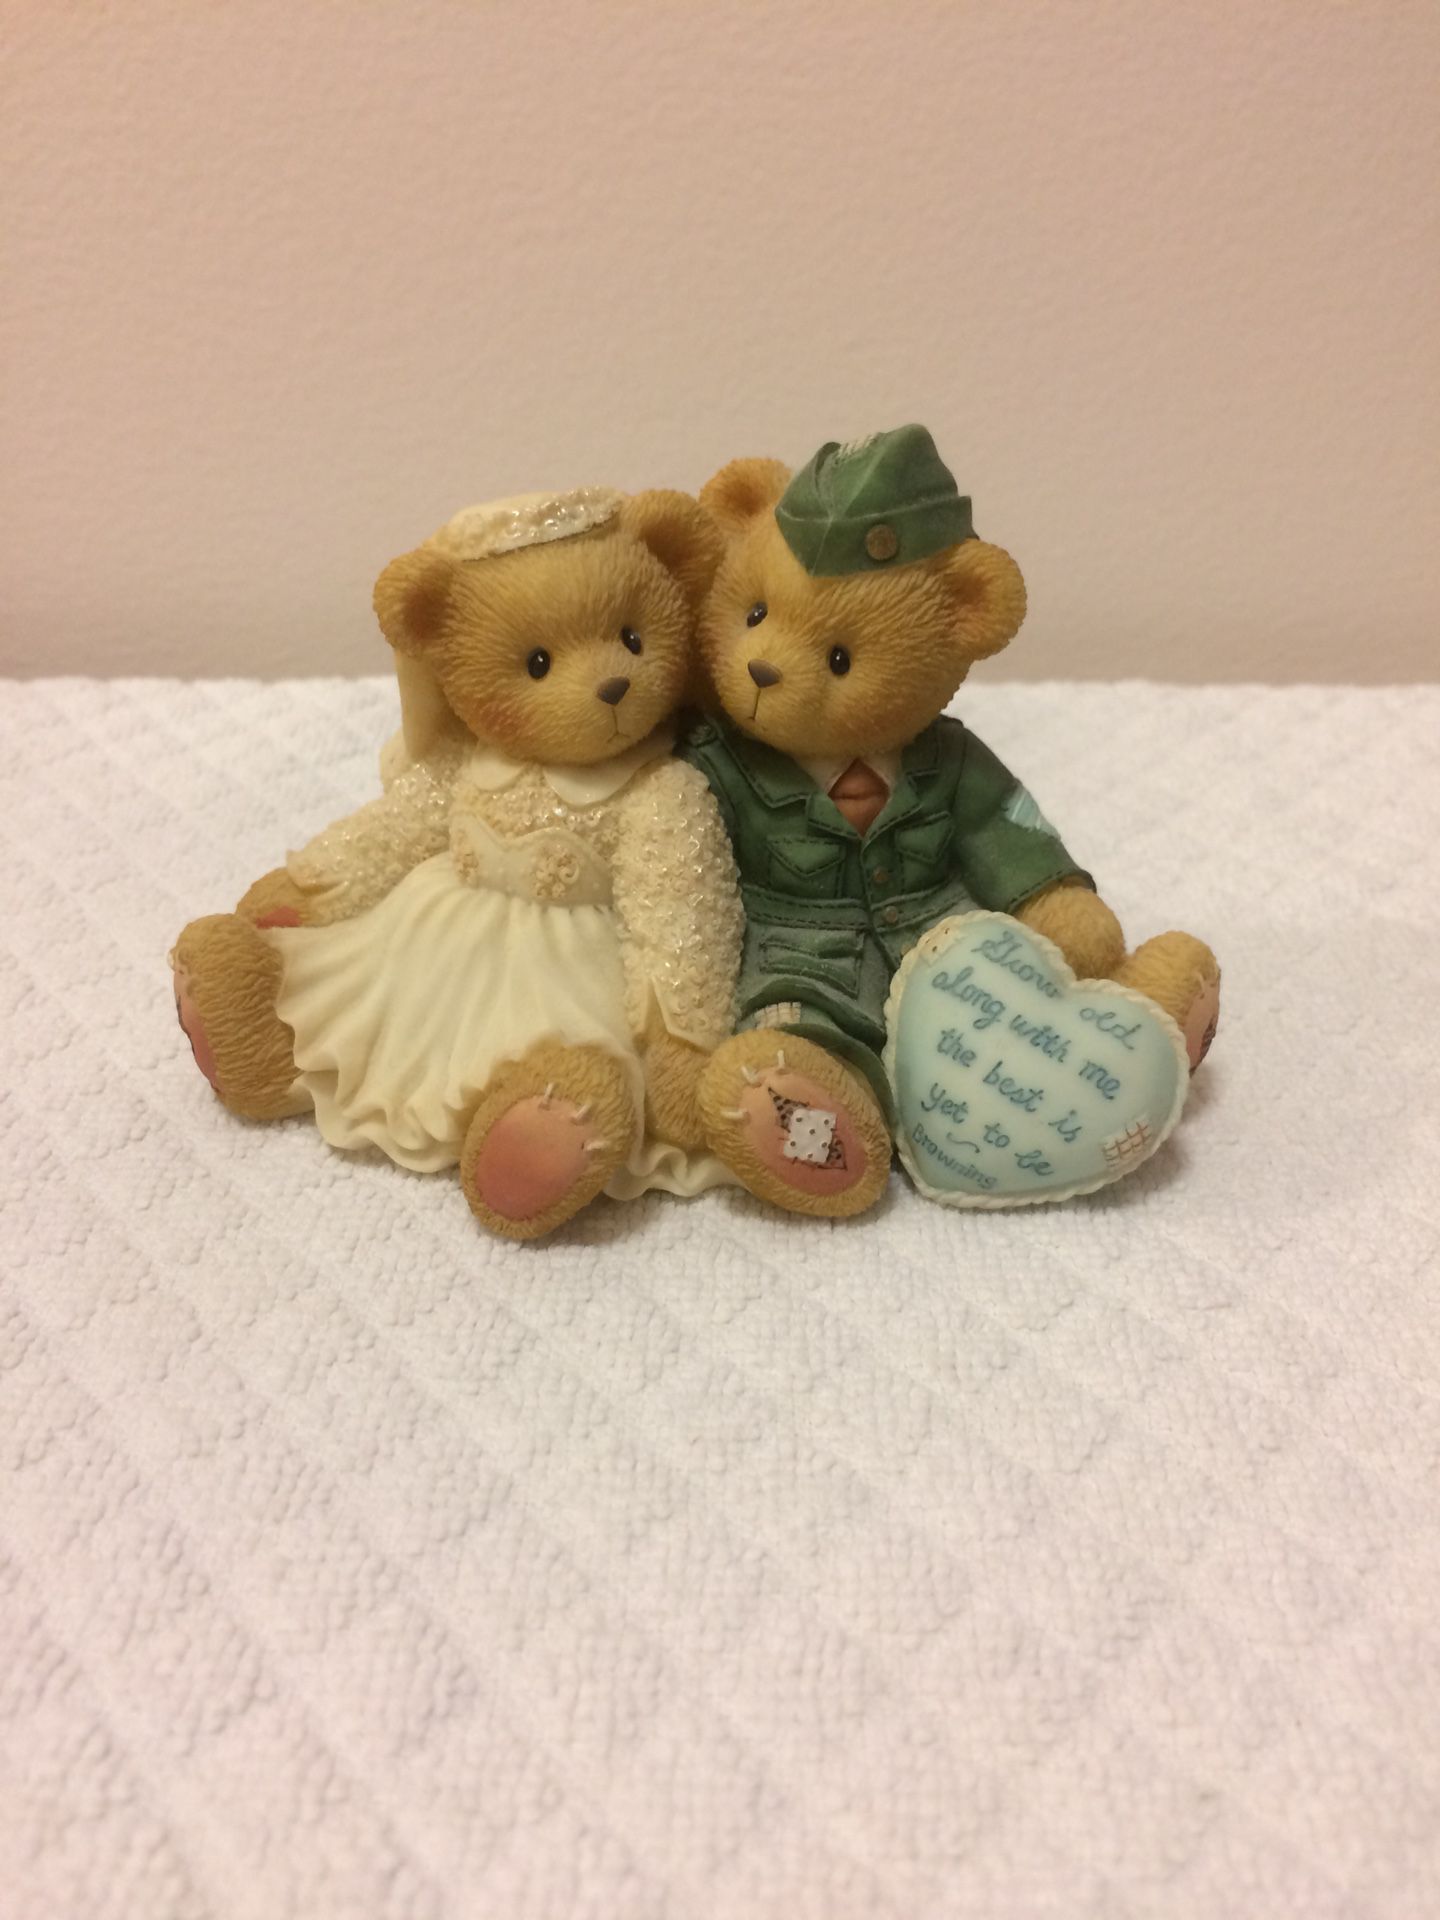 Cherished Teddies “Forever Yours, Forever True”